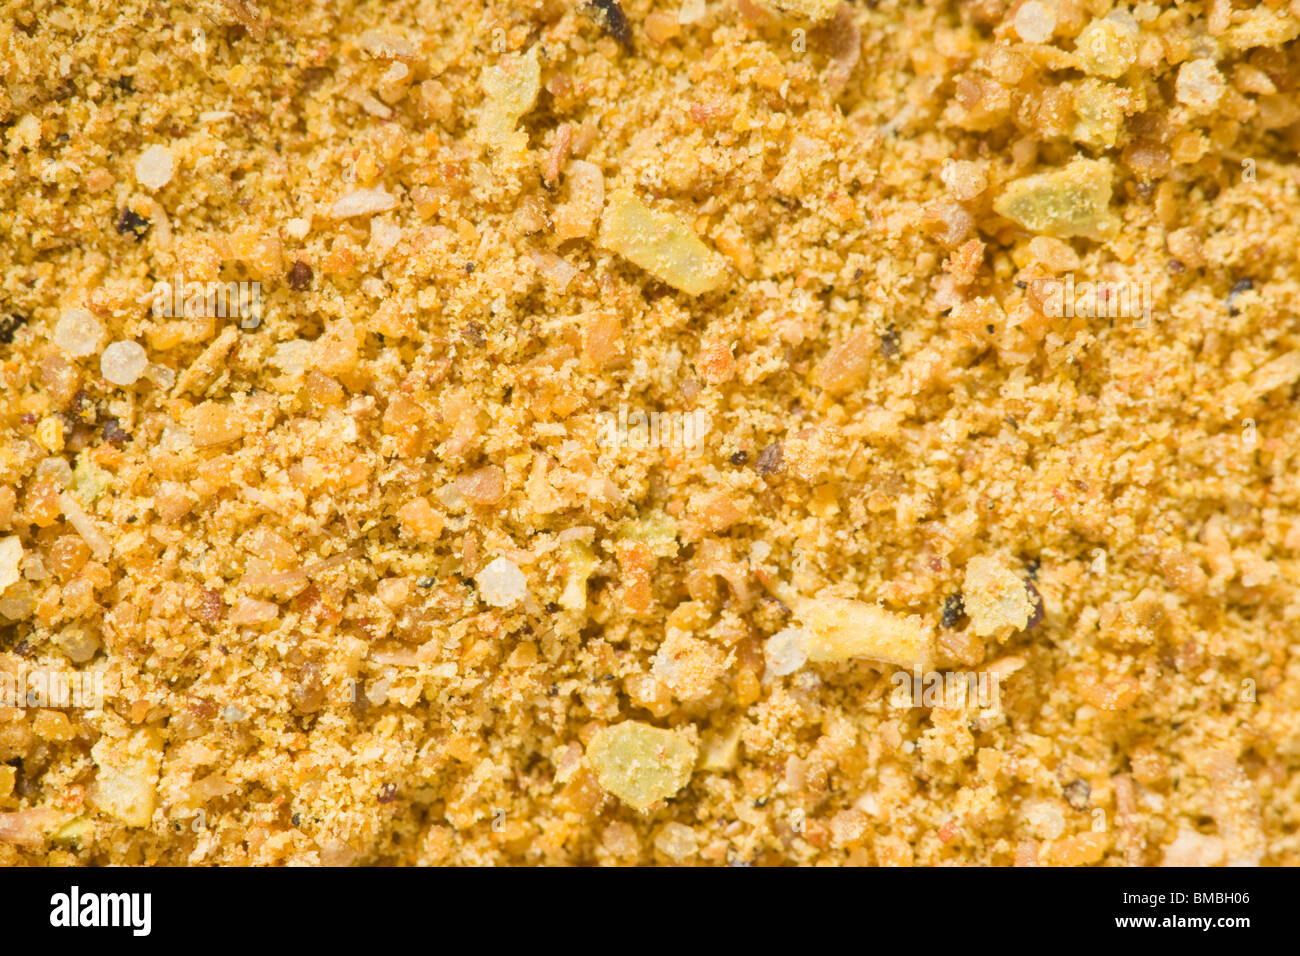 Curry powder in extreme close up Stock Photo